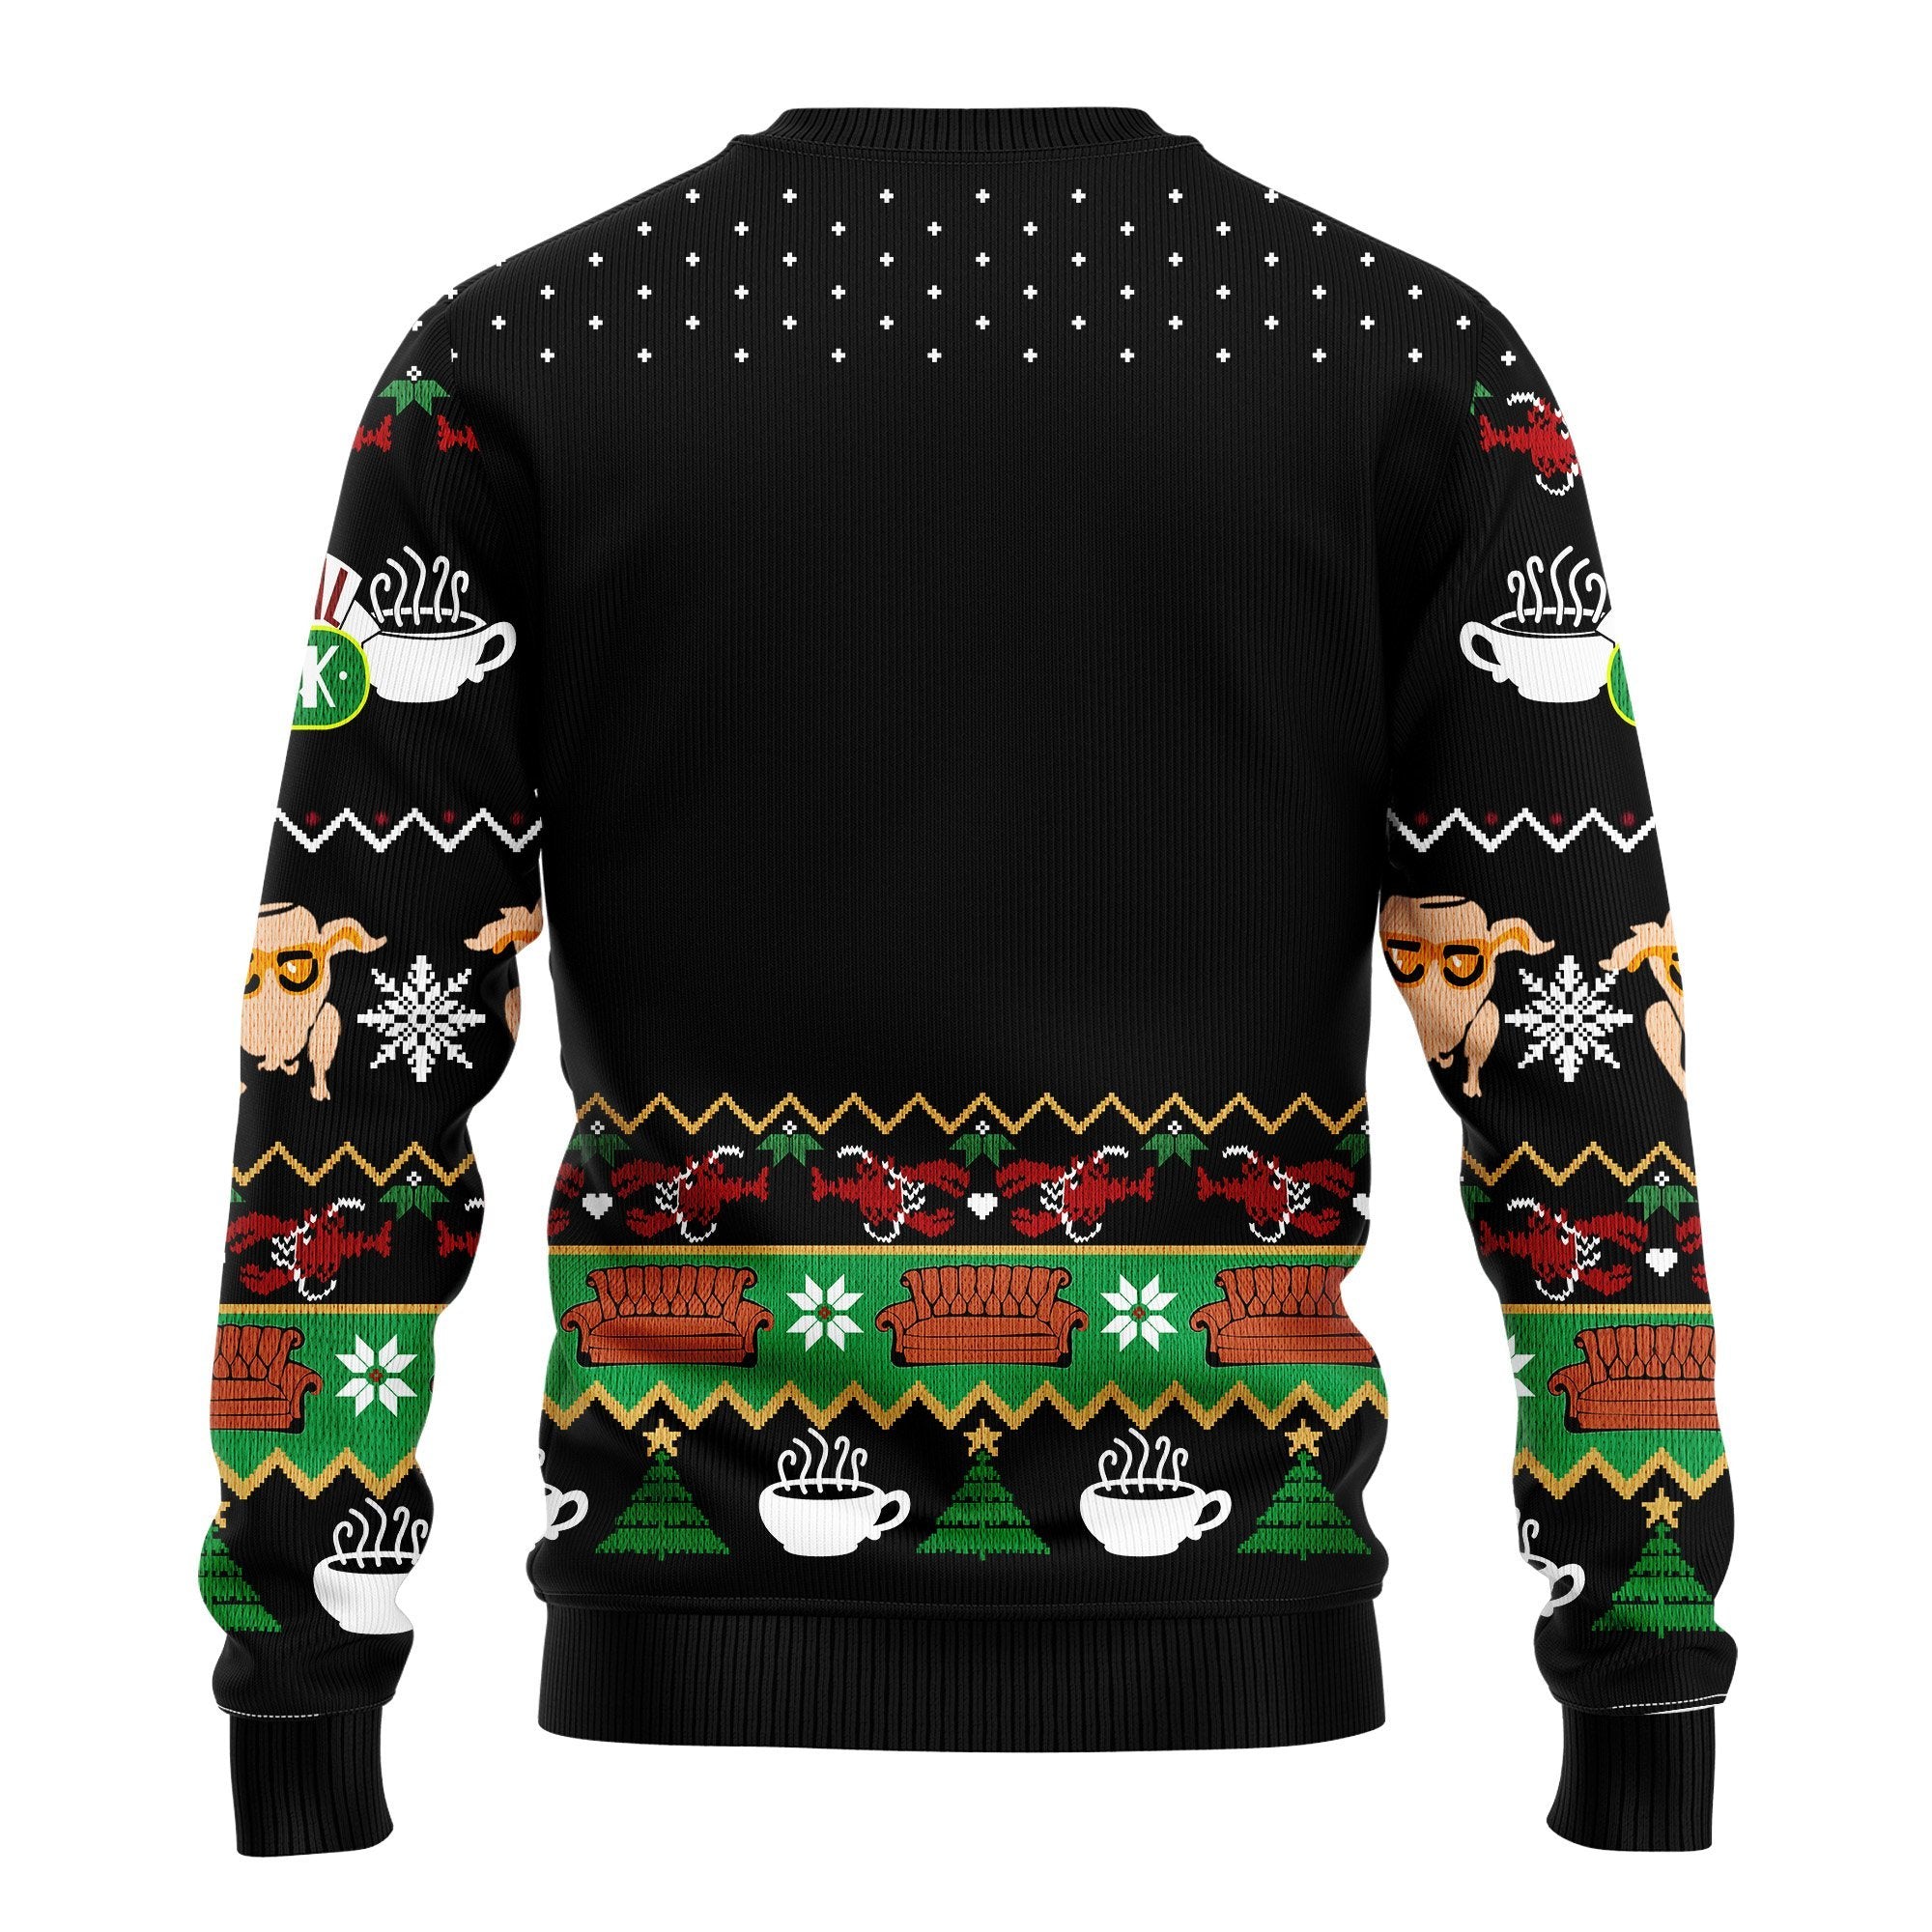 Friends Holiday Ugly Christmas Sweater Amazing Gift Idea Thanksgiving Gift